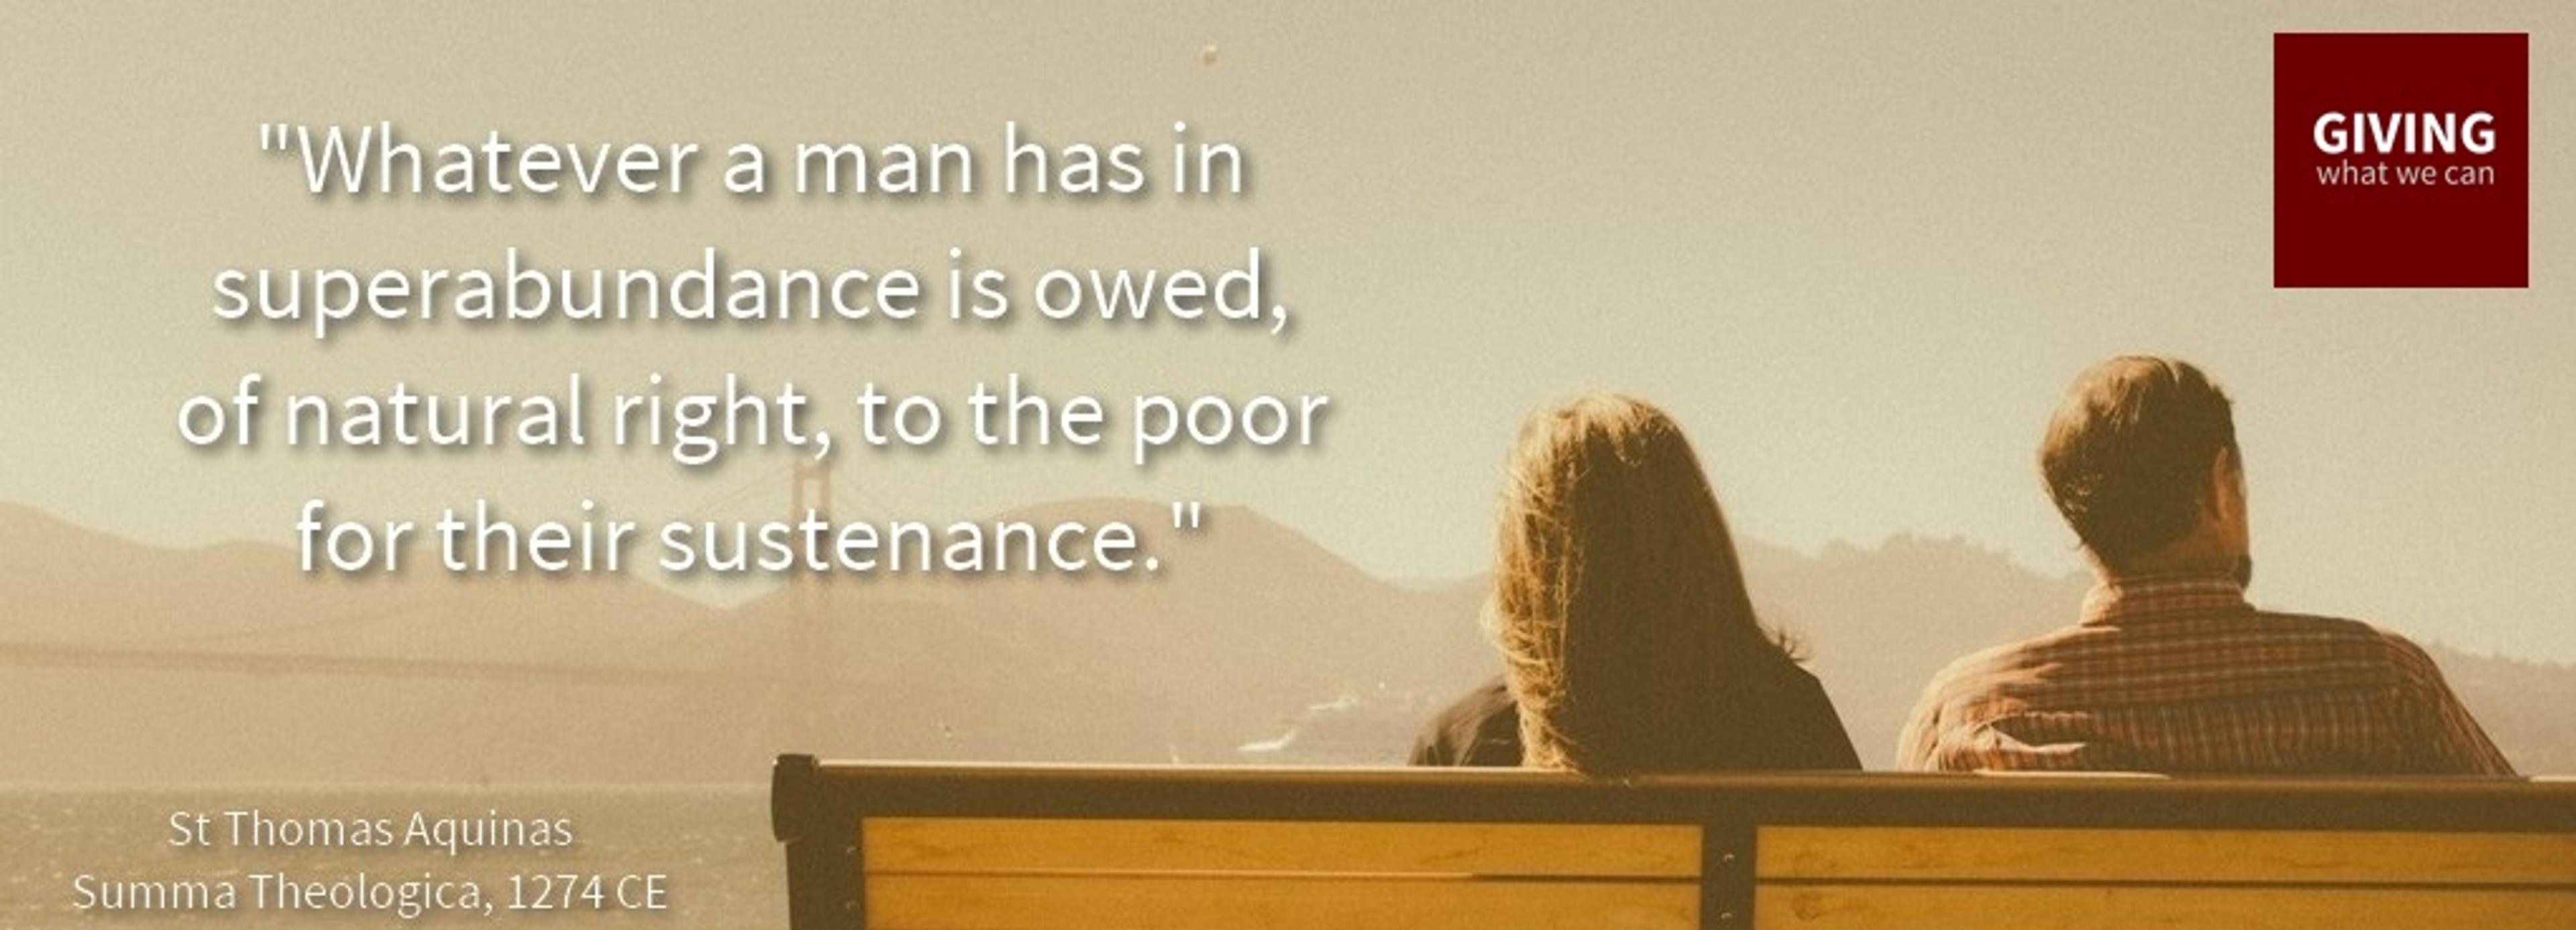 Whatever a man has in superabundance is owed, of natural right, to the poor of their sustenance.